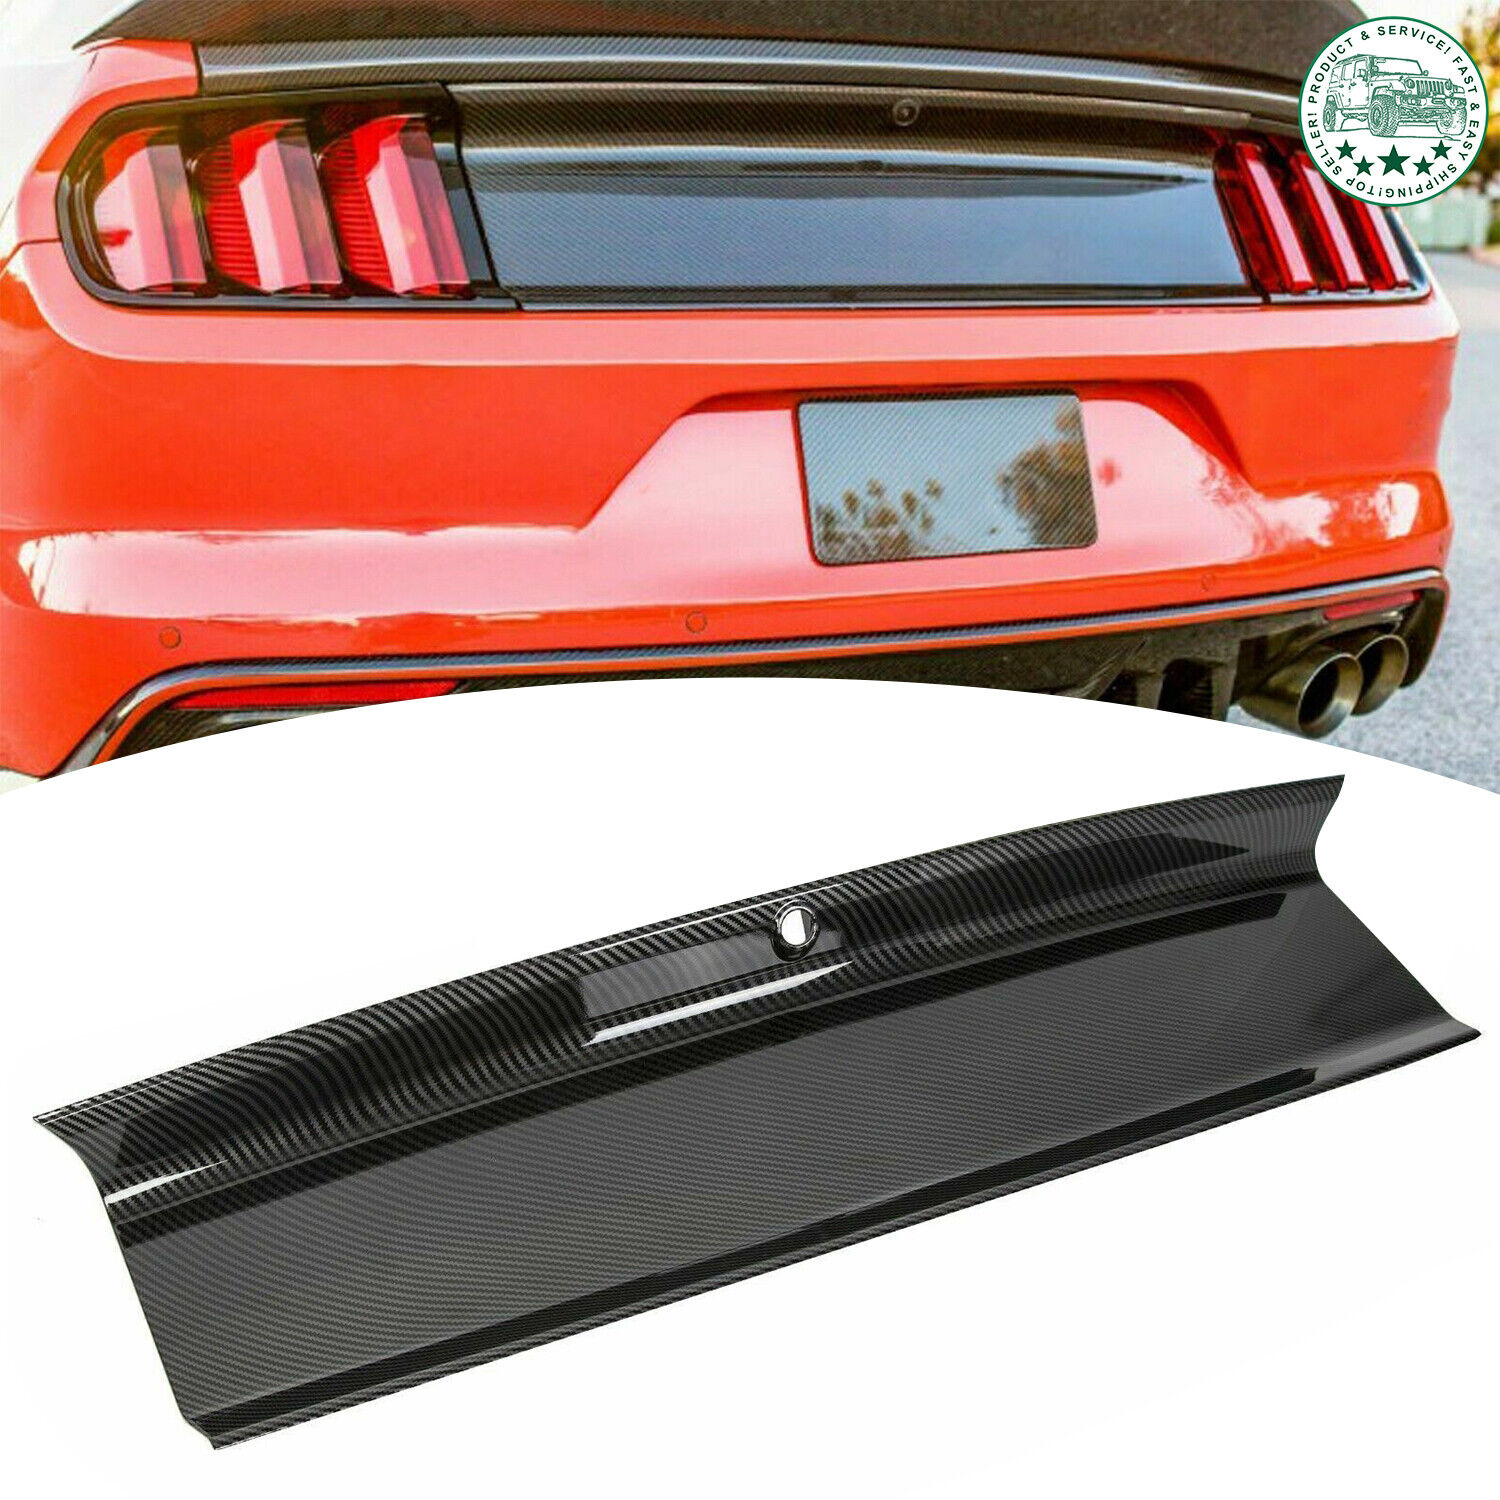 For 15-23 Ford Mustang Gt Carbon Fiber Color Rear Trunk Panel Decklid Trim Cover